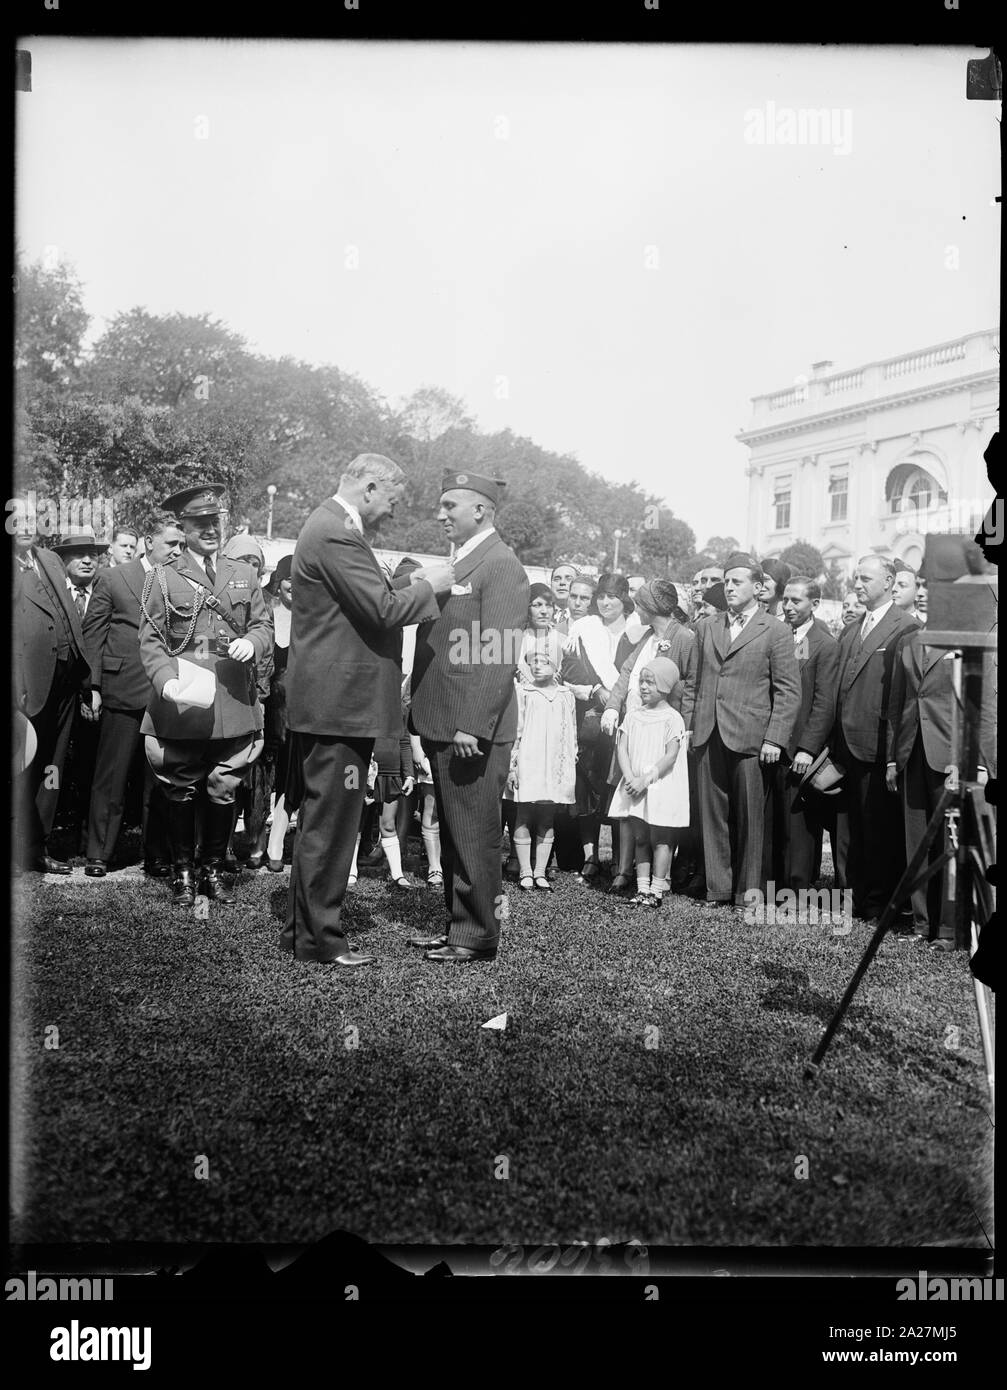 President Hoover presents Congressional Medal of Honor to World War hero. Michael Valente, formerly Private, Company D, 107th infantry, 27th Division during the World War, receiving from President Hoover the Congressional Medal of Honor at the White House today. Valente receives the medal for bravery while in Hindenberg Line during the World War. He enlisted at Ogdensburg, N.Y., but is now a resident of Long Beach, N.Y. Stock Photo